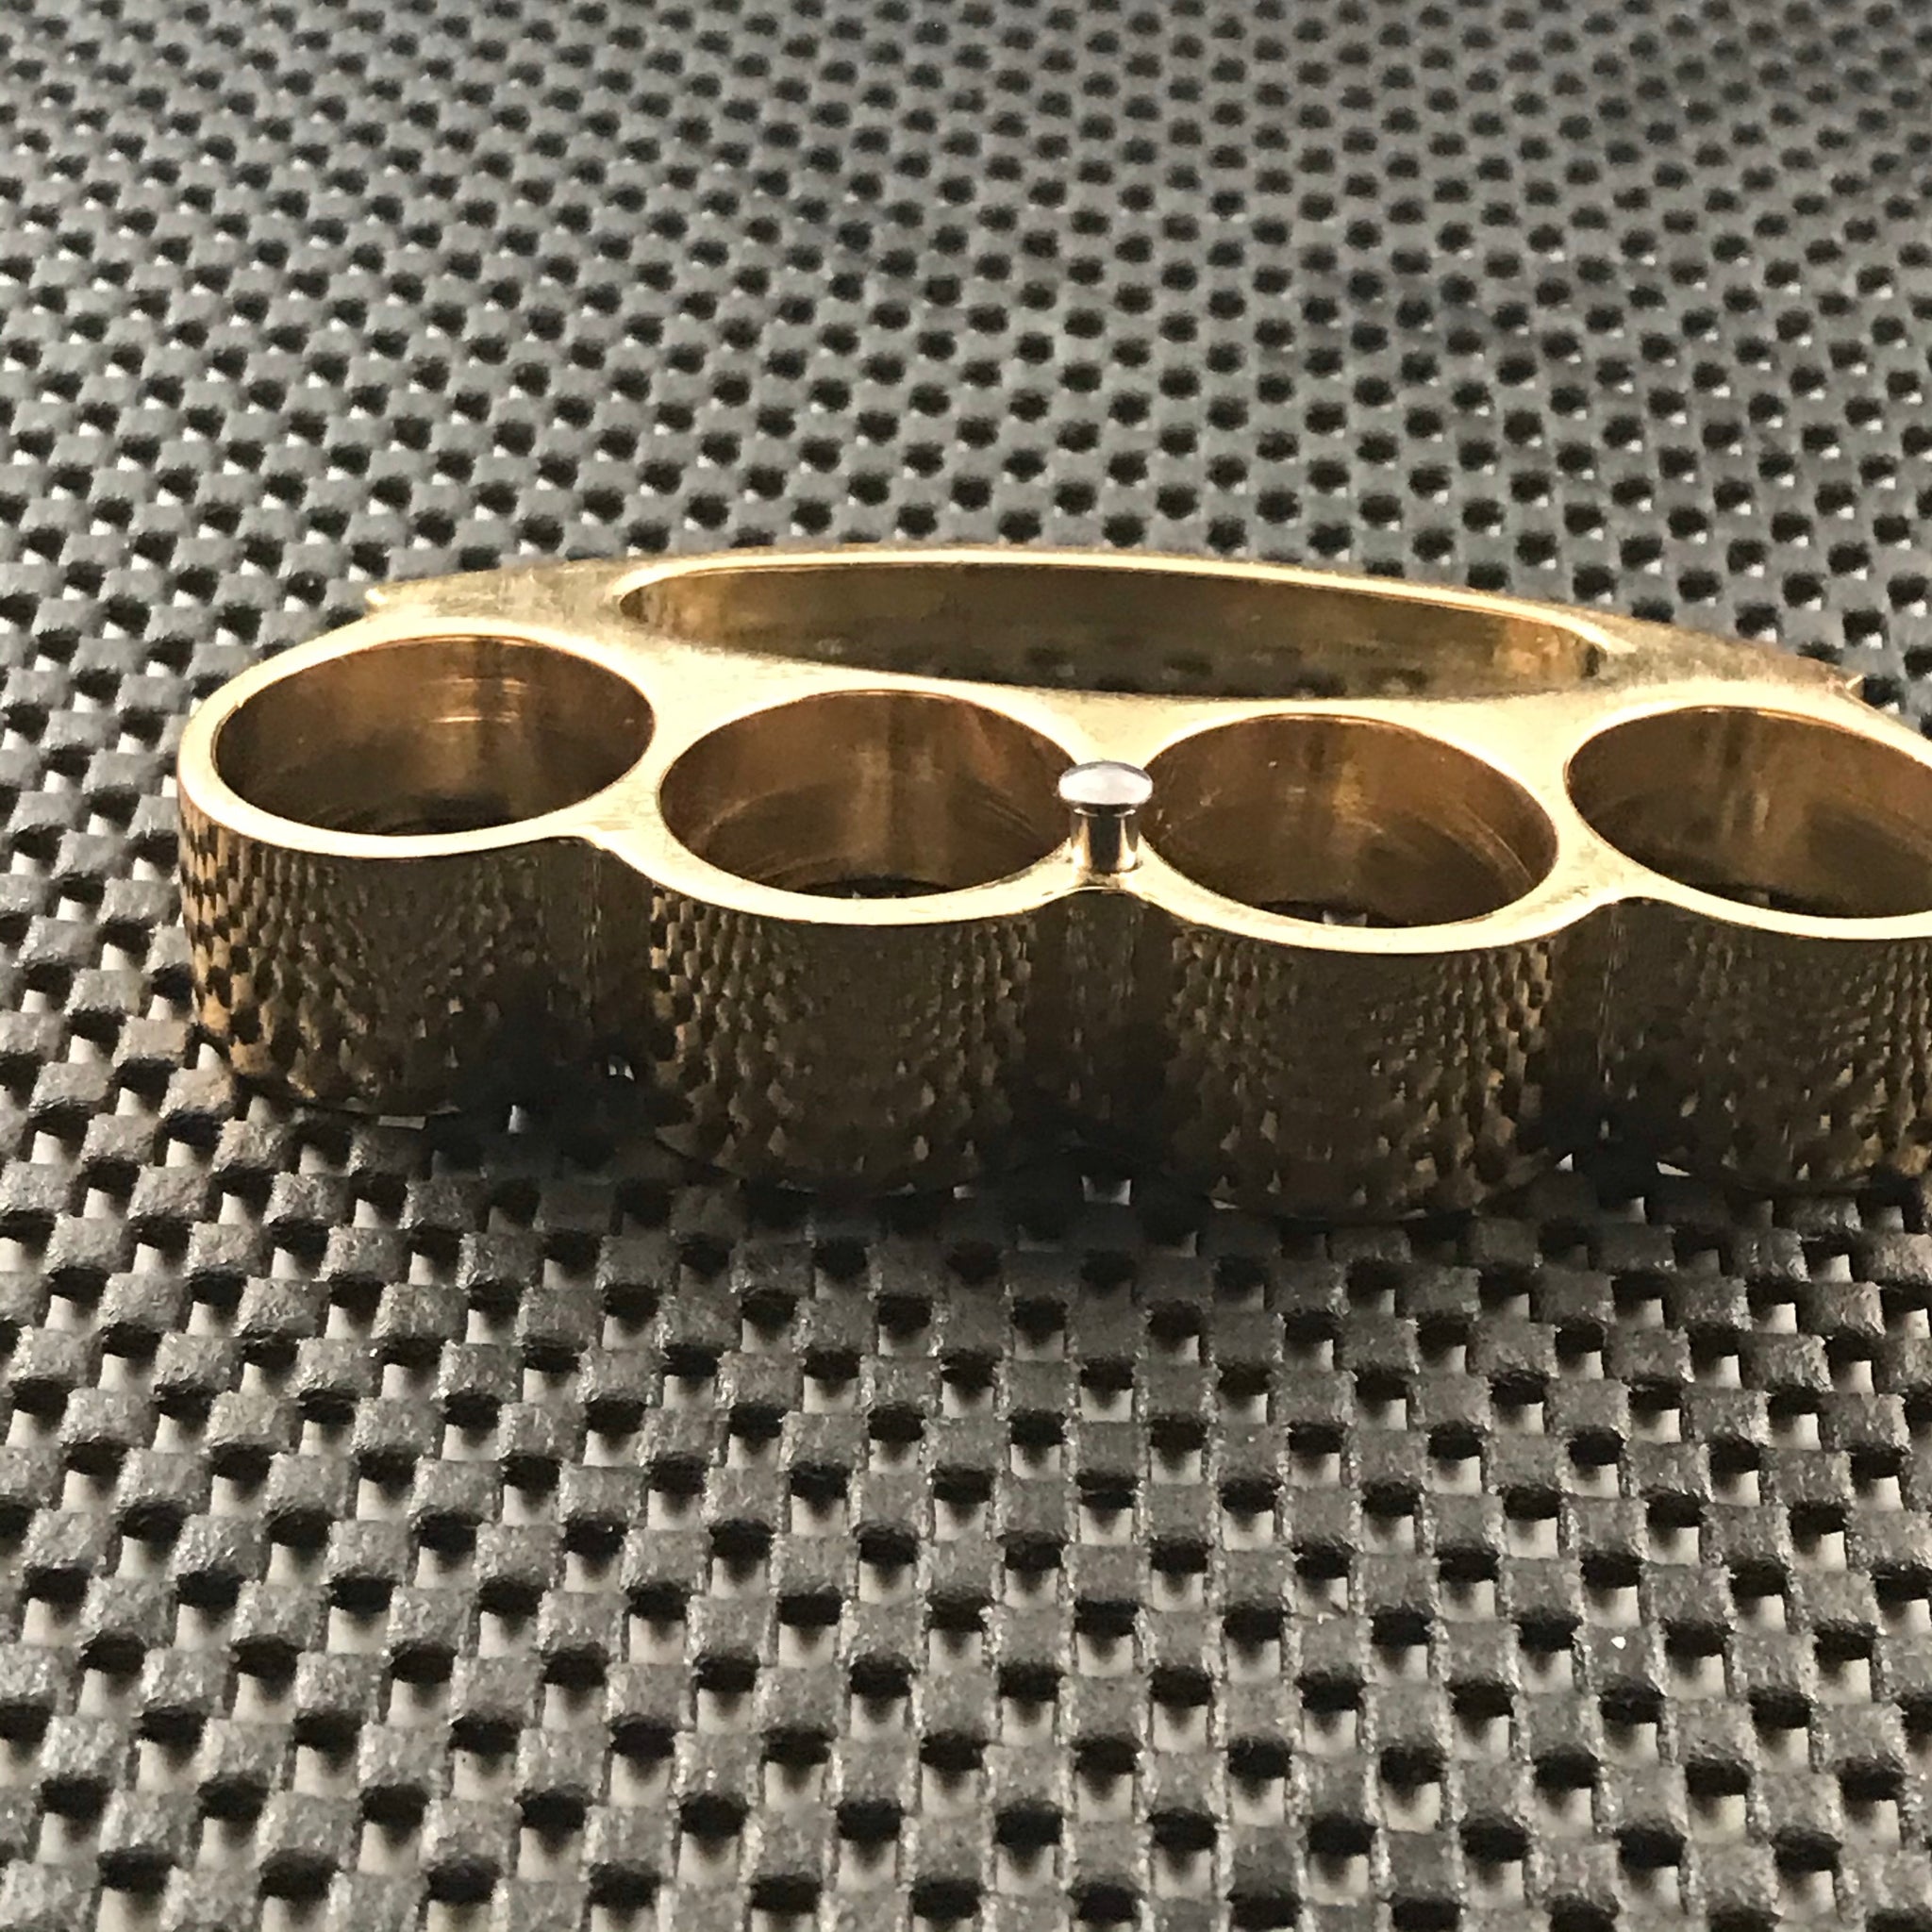 Army Brass Knuckles Belt Buckle Paperweight - Shiny Gold